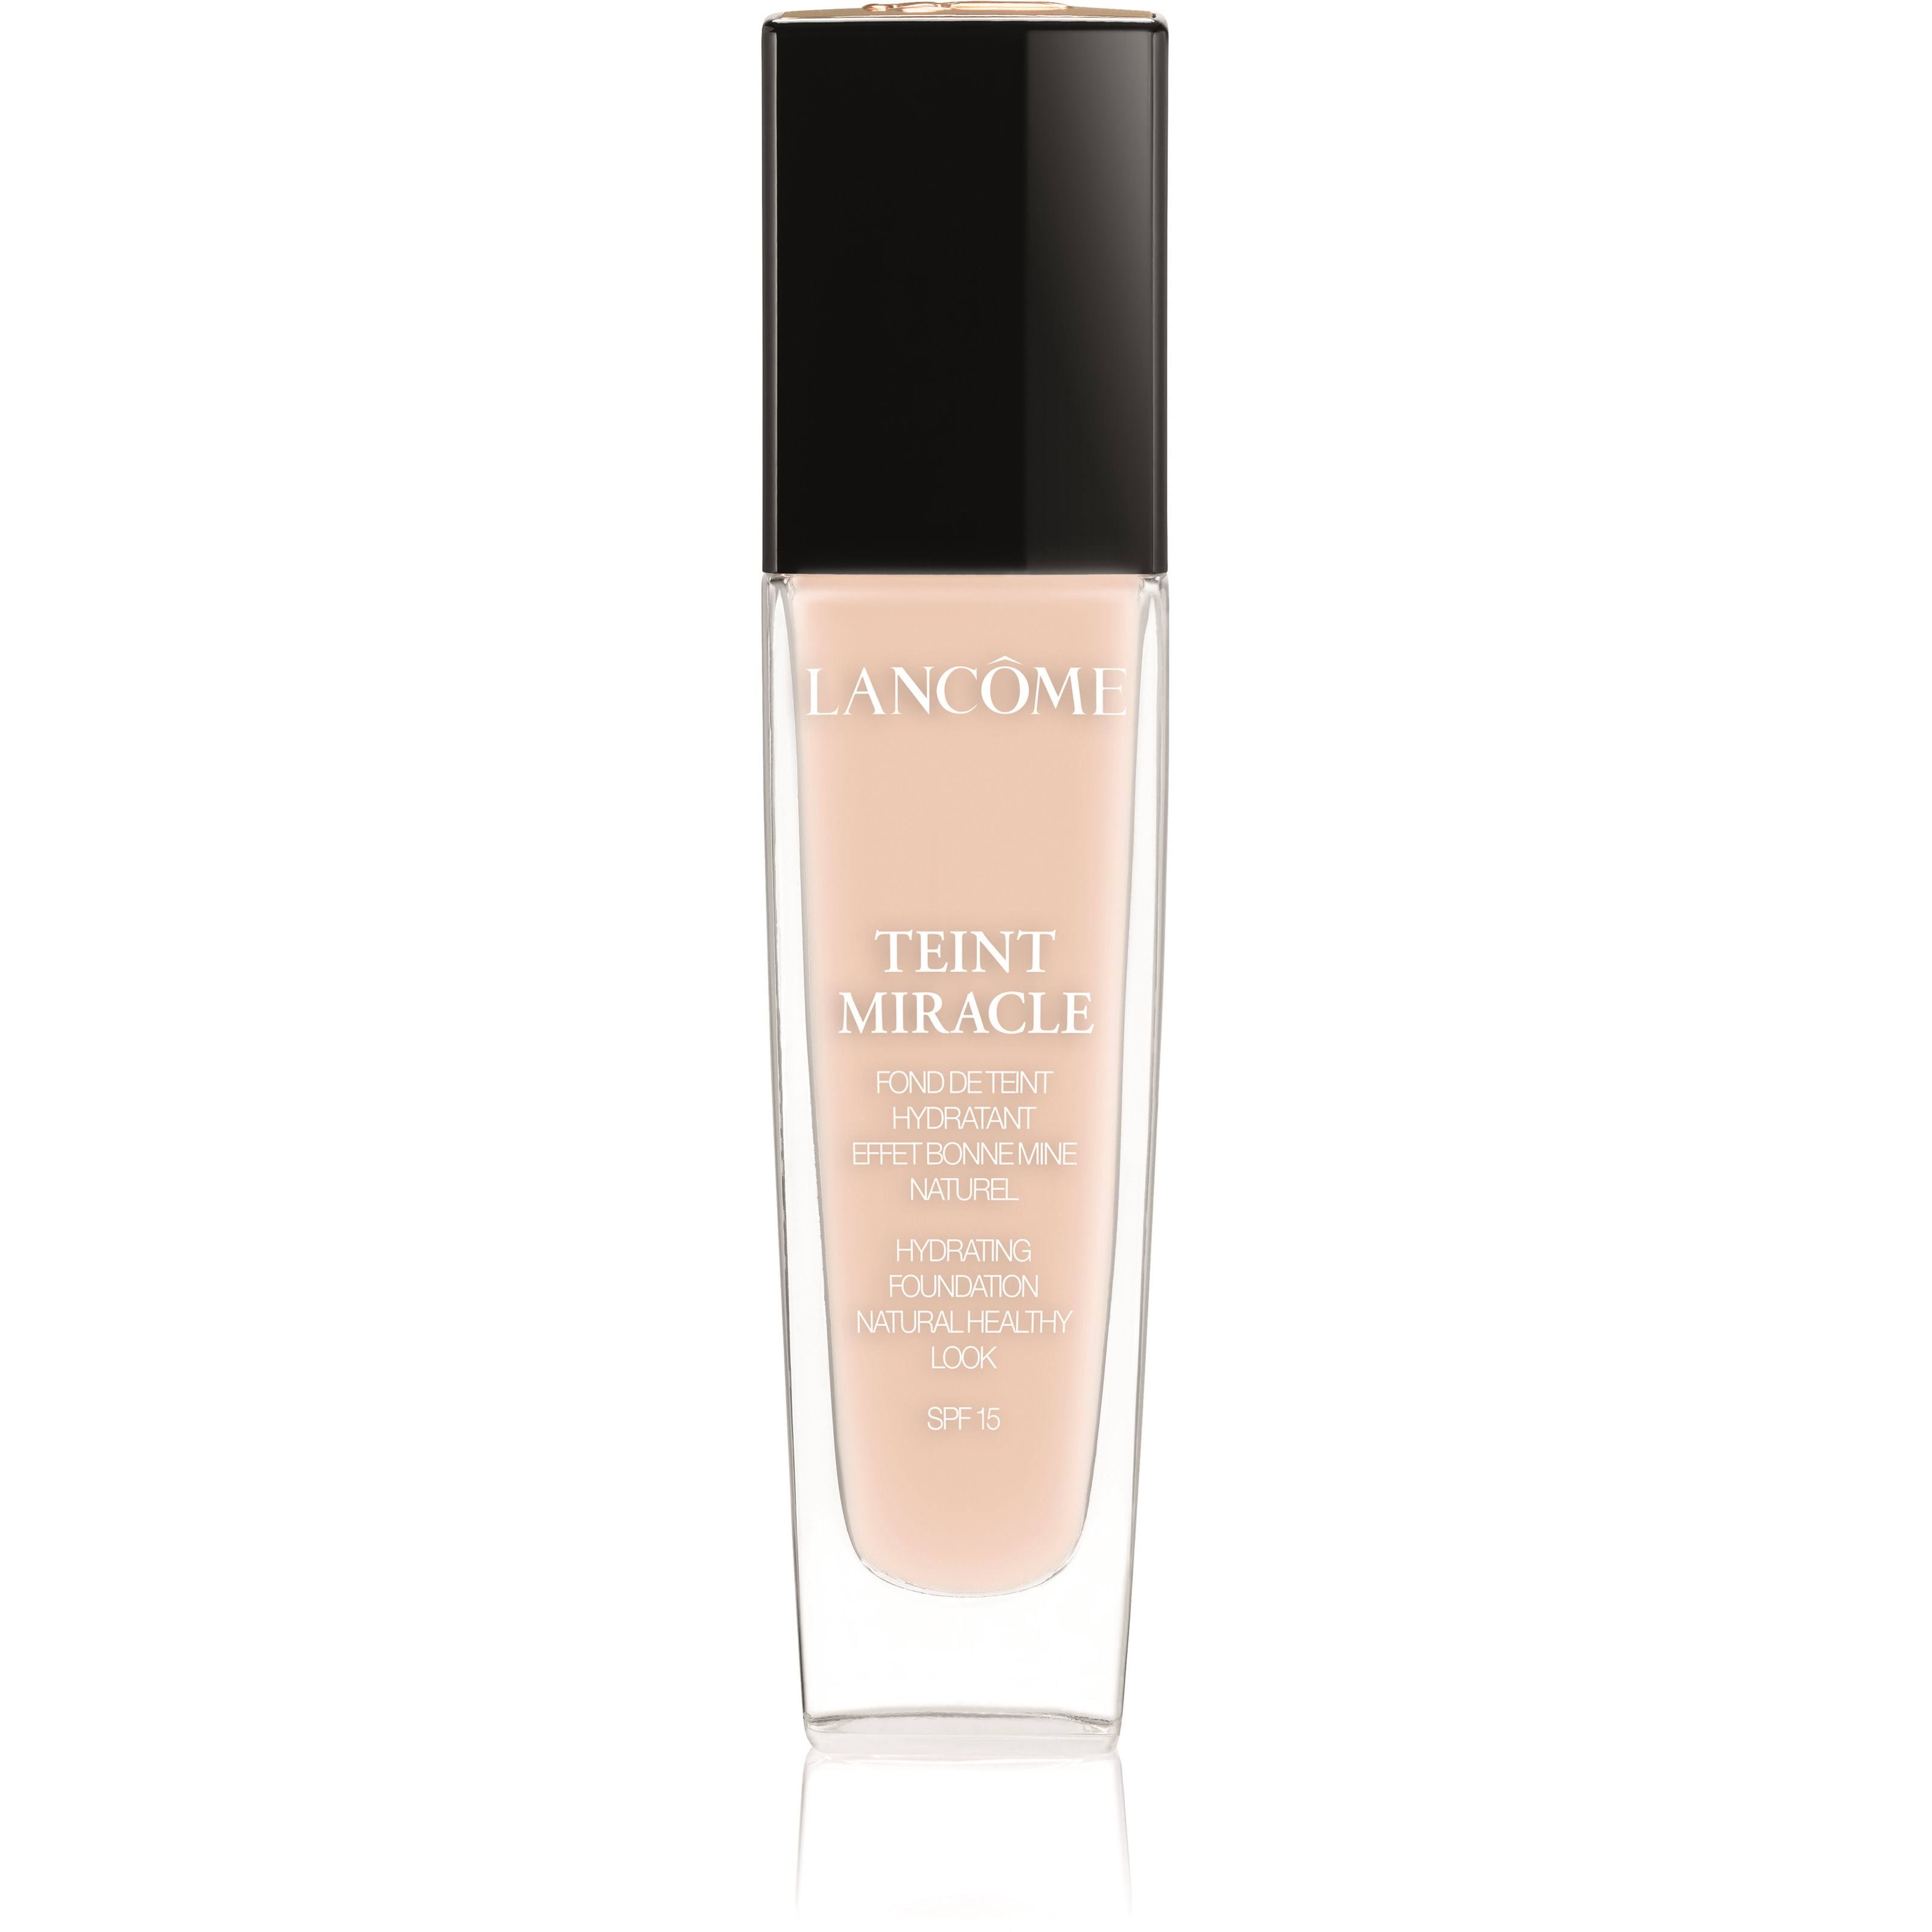 Lancome Teint Miracle Foundation - 005 Beige, 30ml